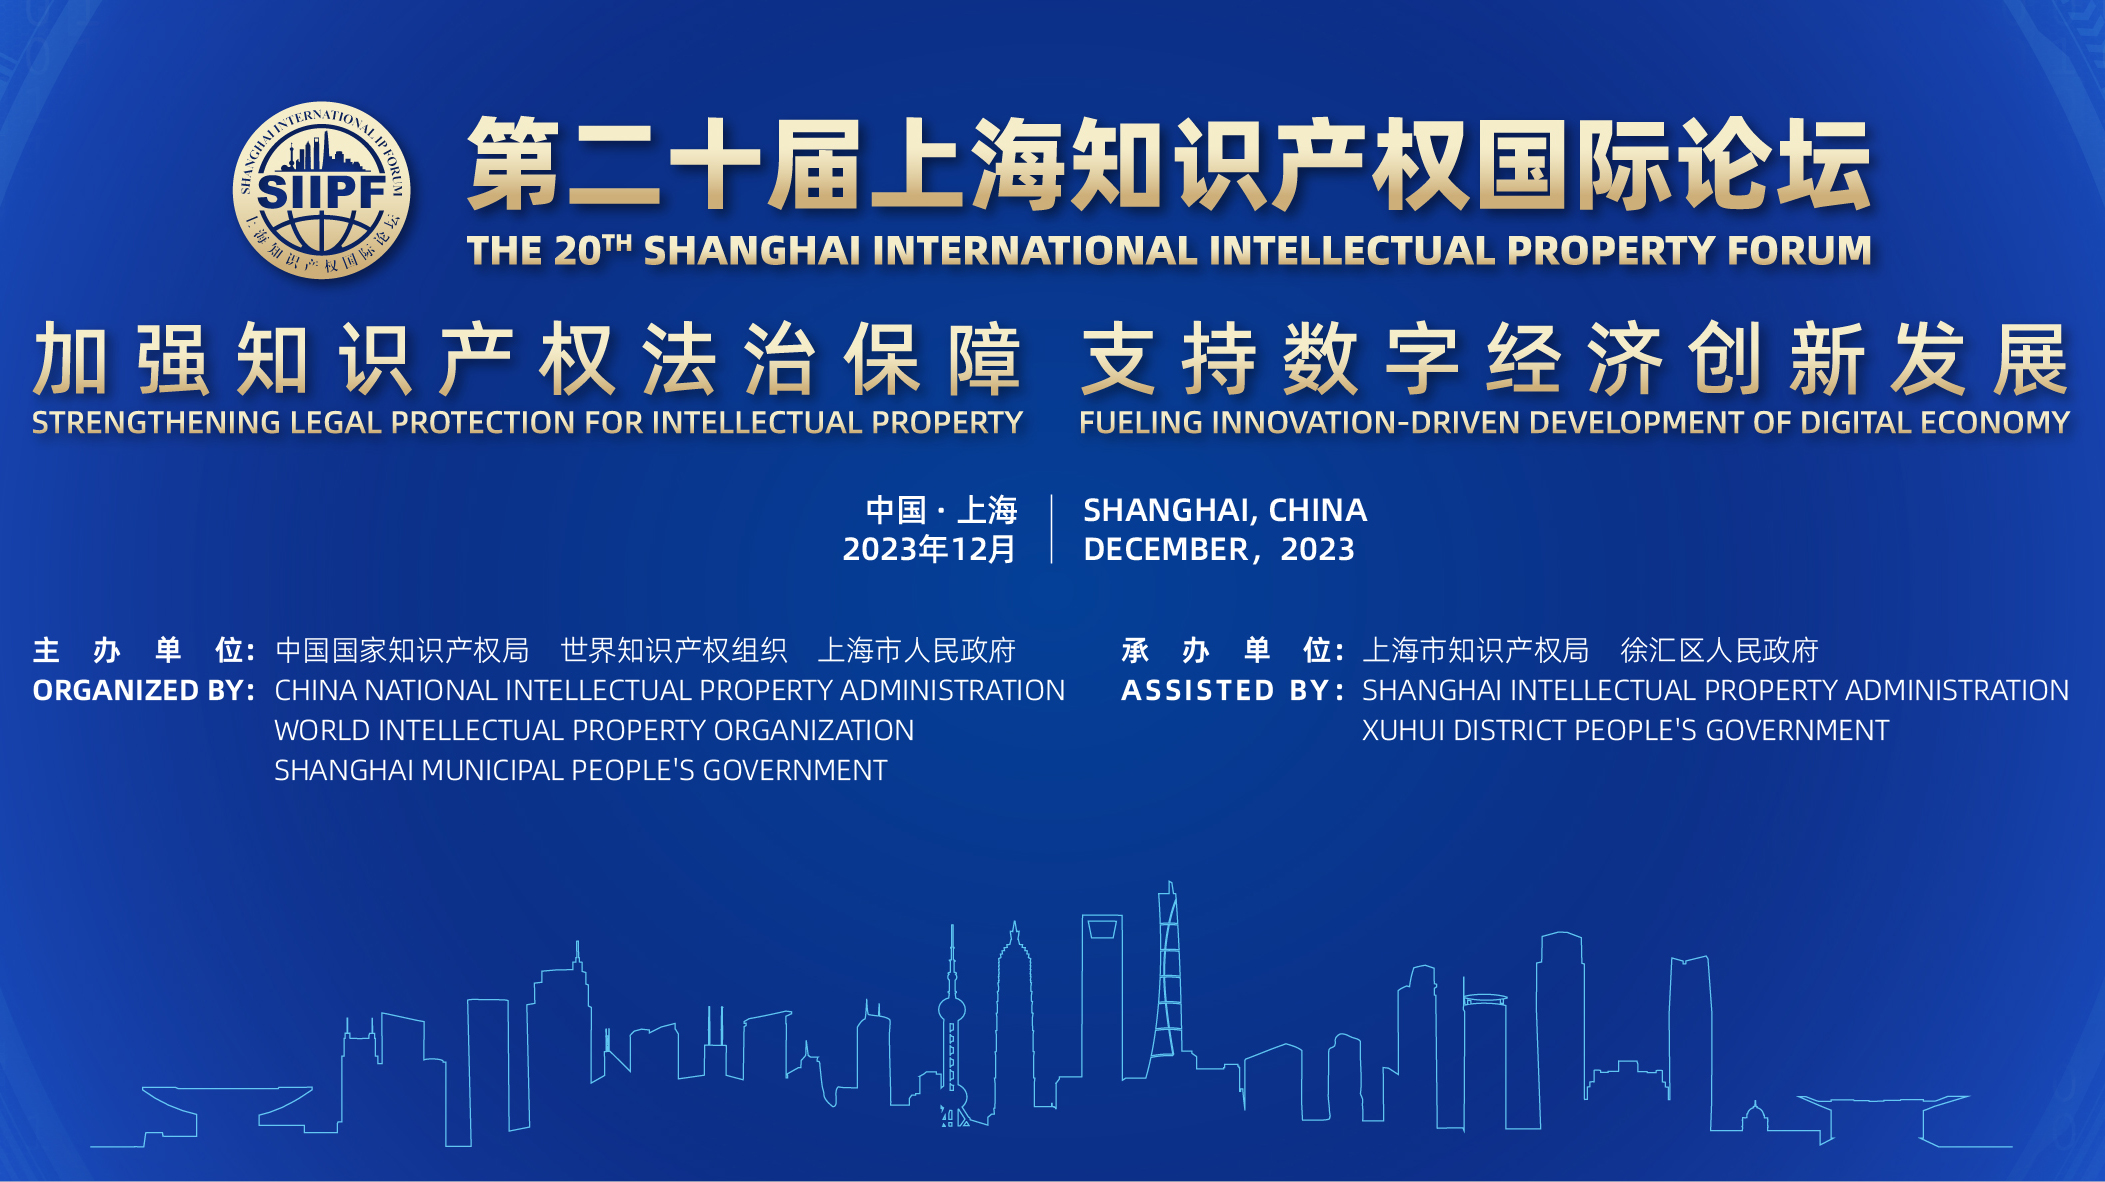 Introduction to the 20th Shanghai International Intellectual Property Forum